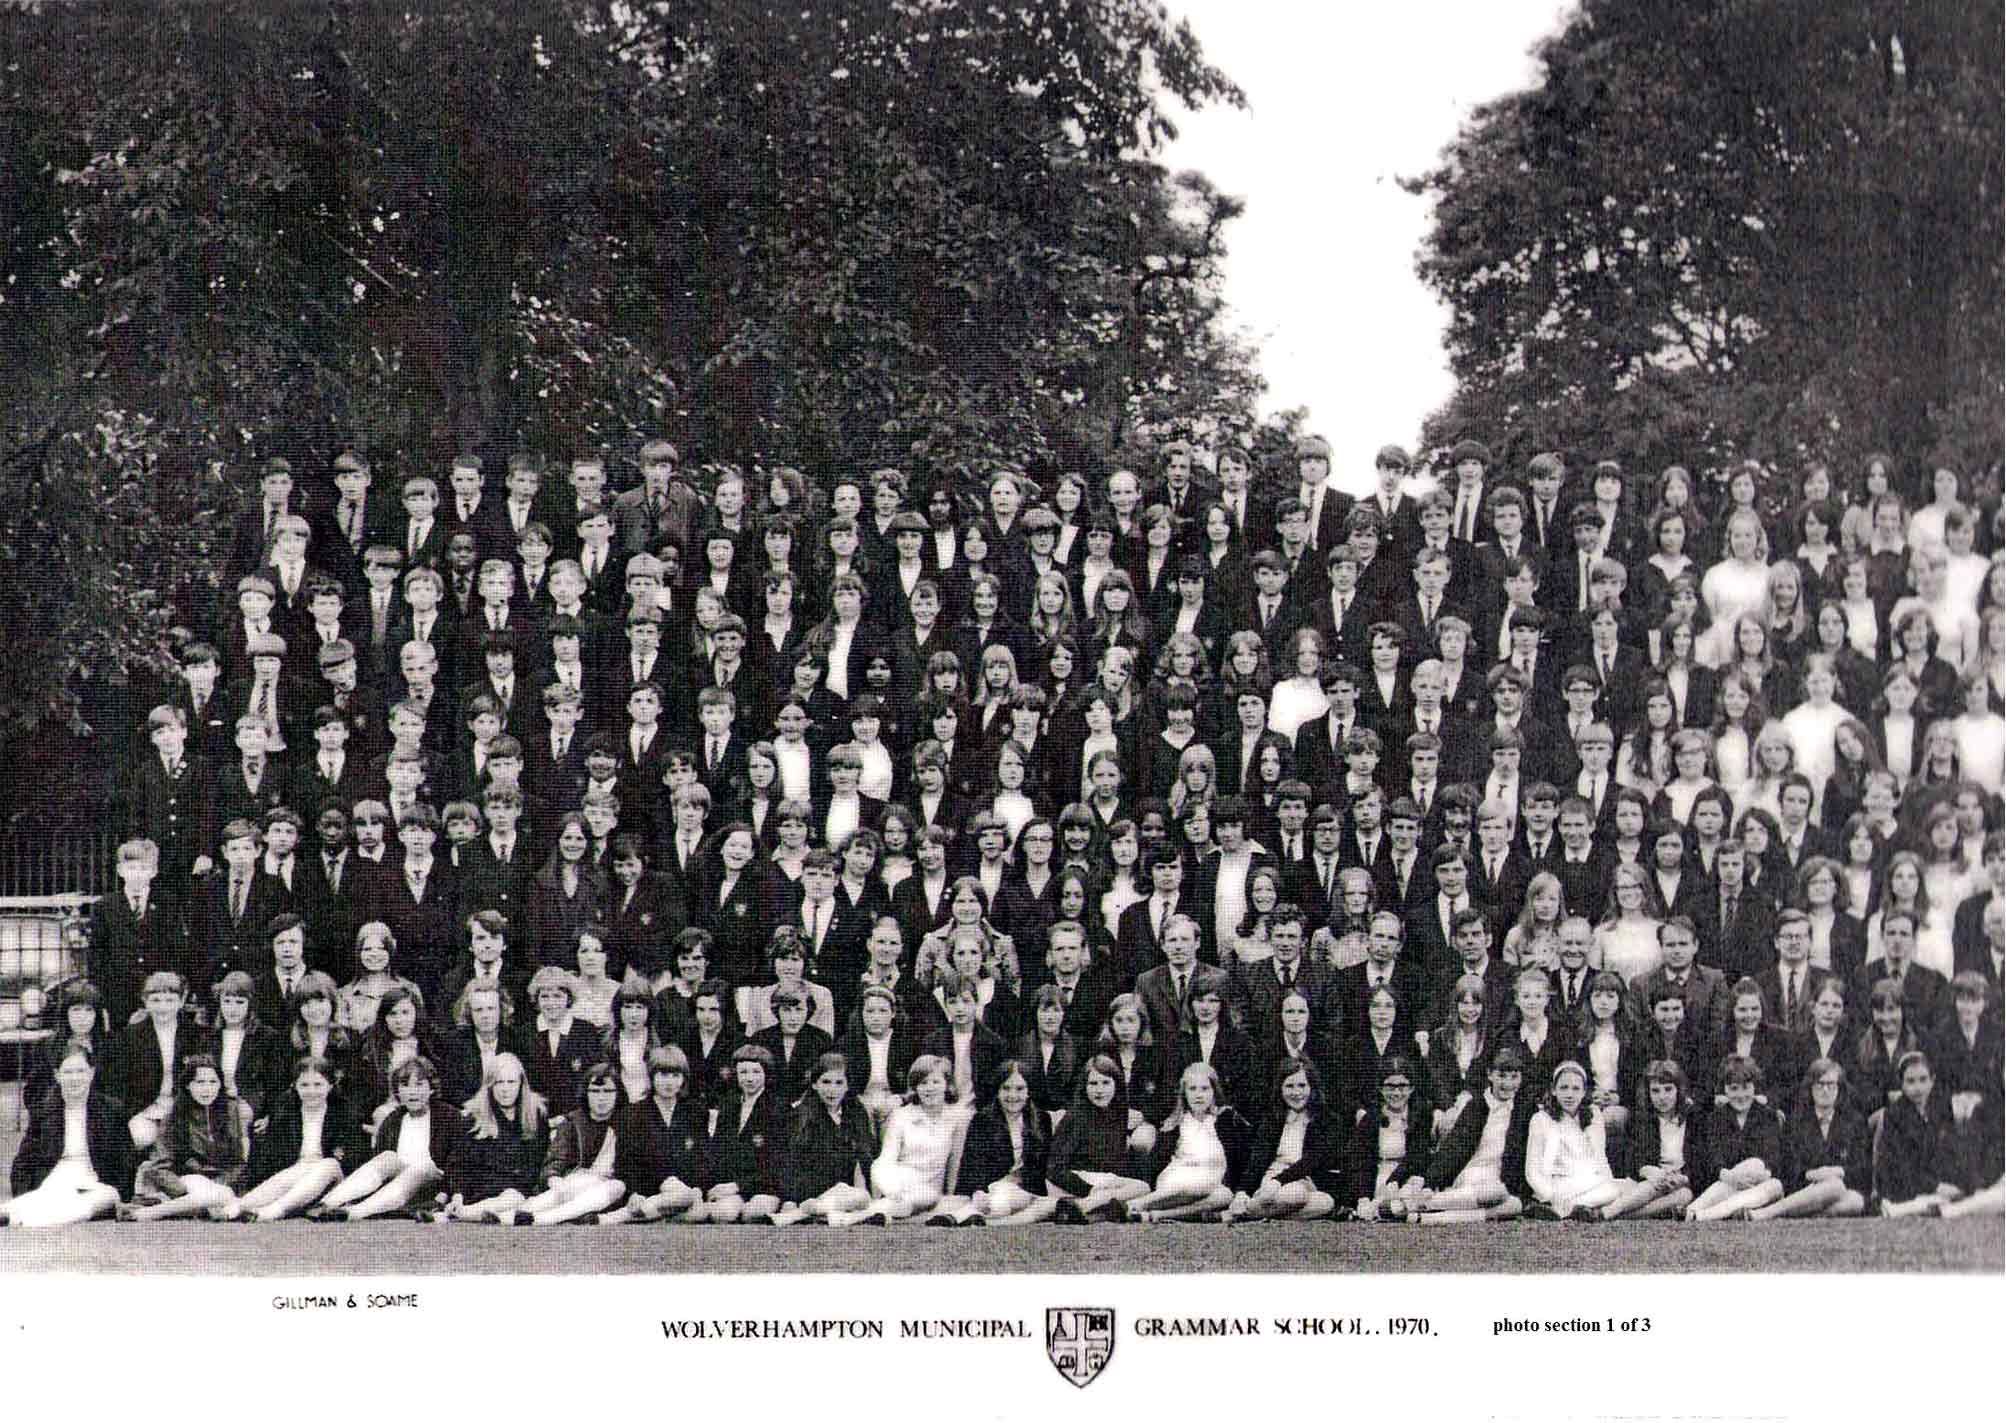 the 1970 Left hand side of  School Photograph